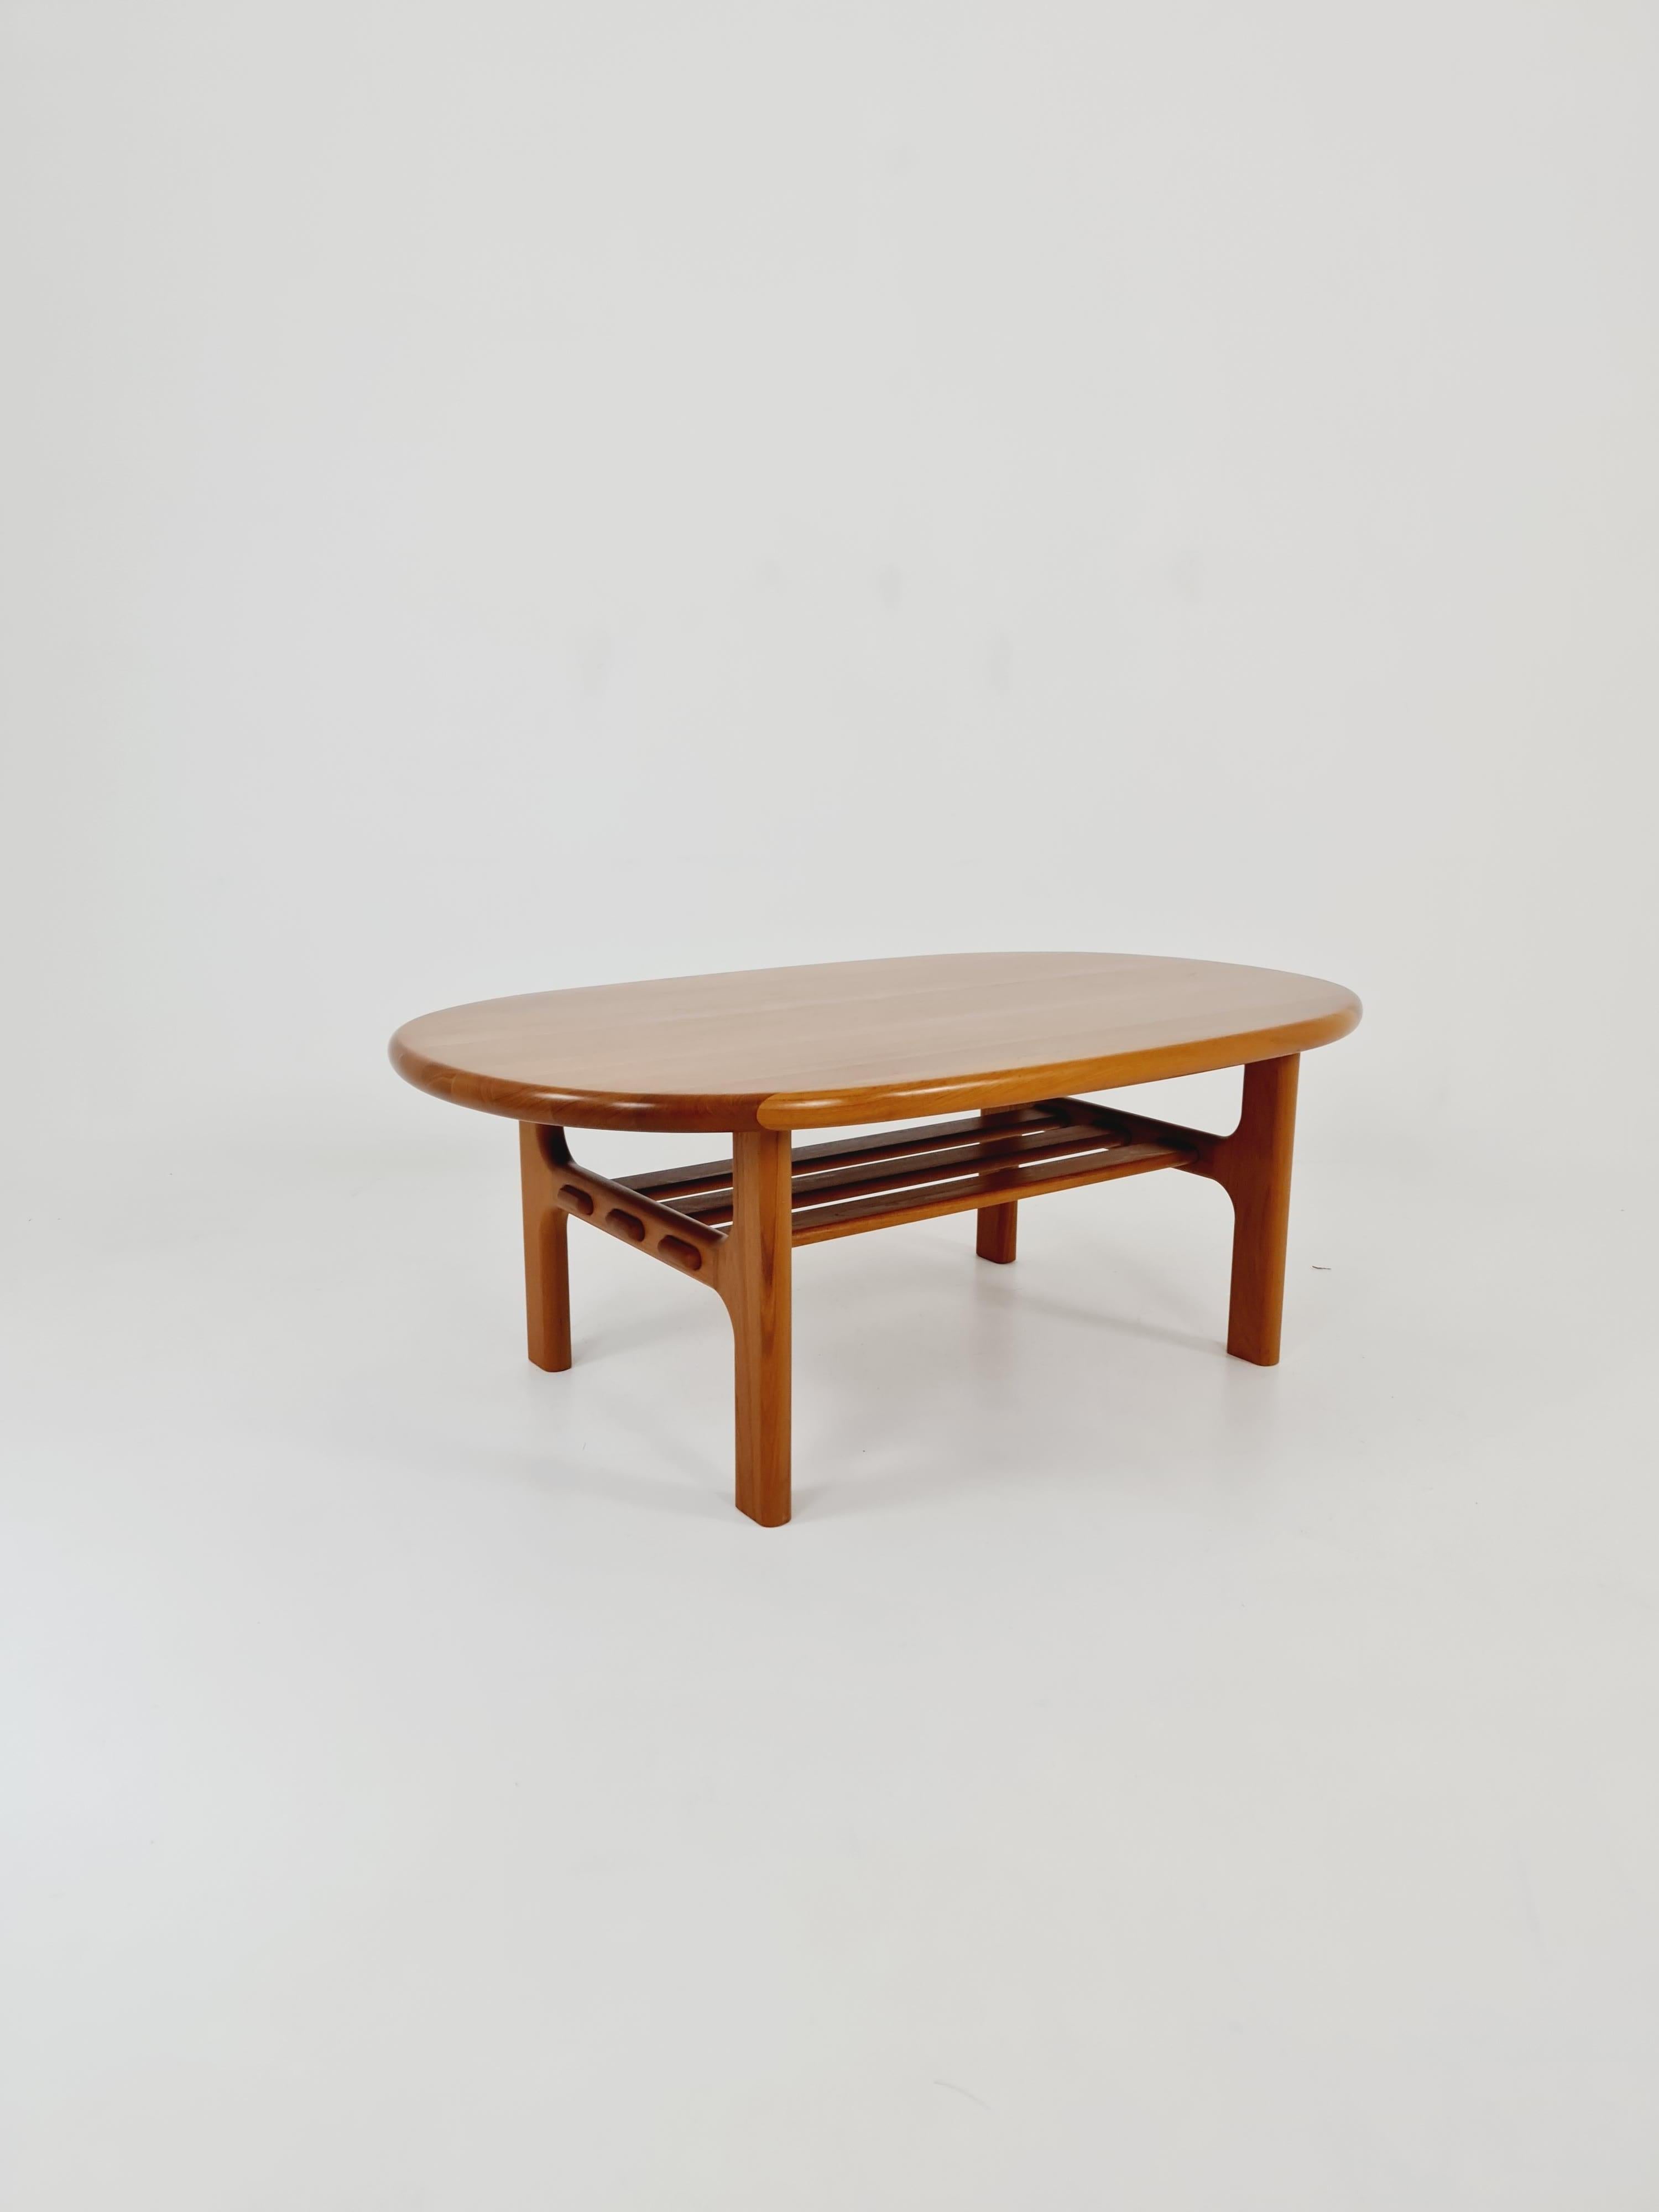 Danish Teak solid coffee table/ side table By Niels Bach for Randers Möbel, 1960 For Sale 2